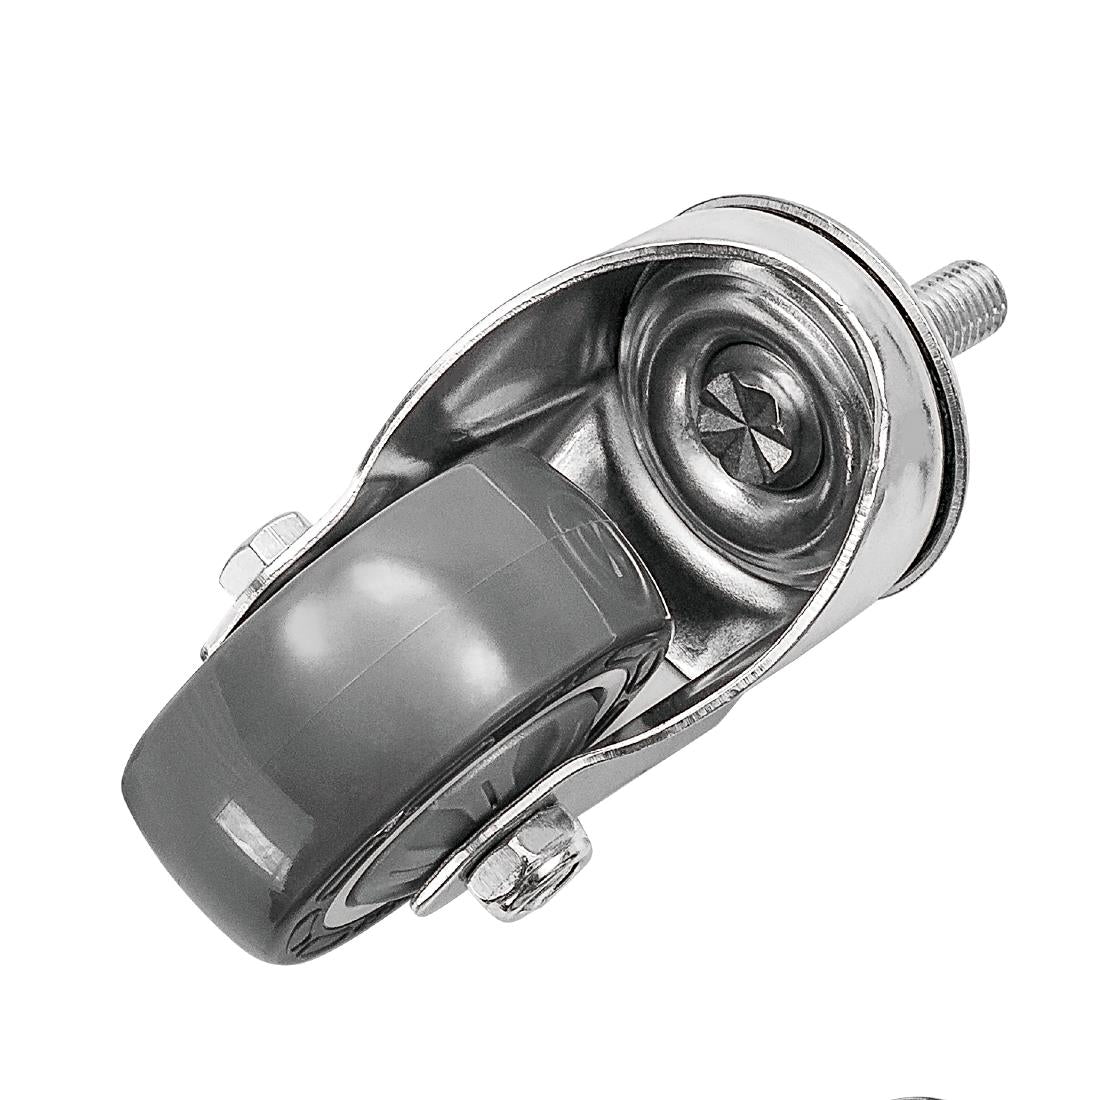 Vogue Castors for Vogue Stainless Steel Tables (Pack of 4)